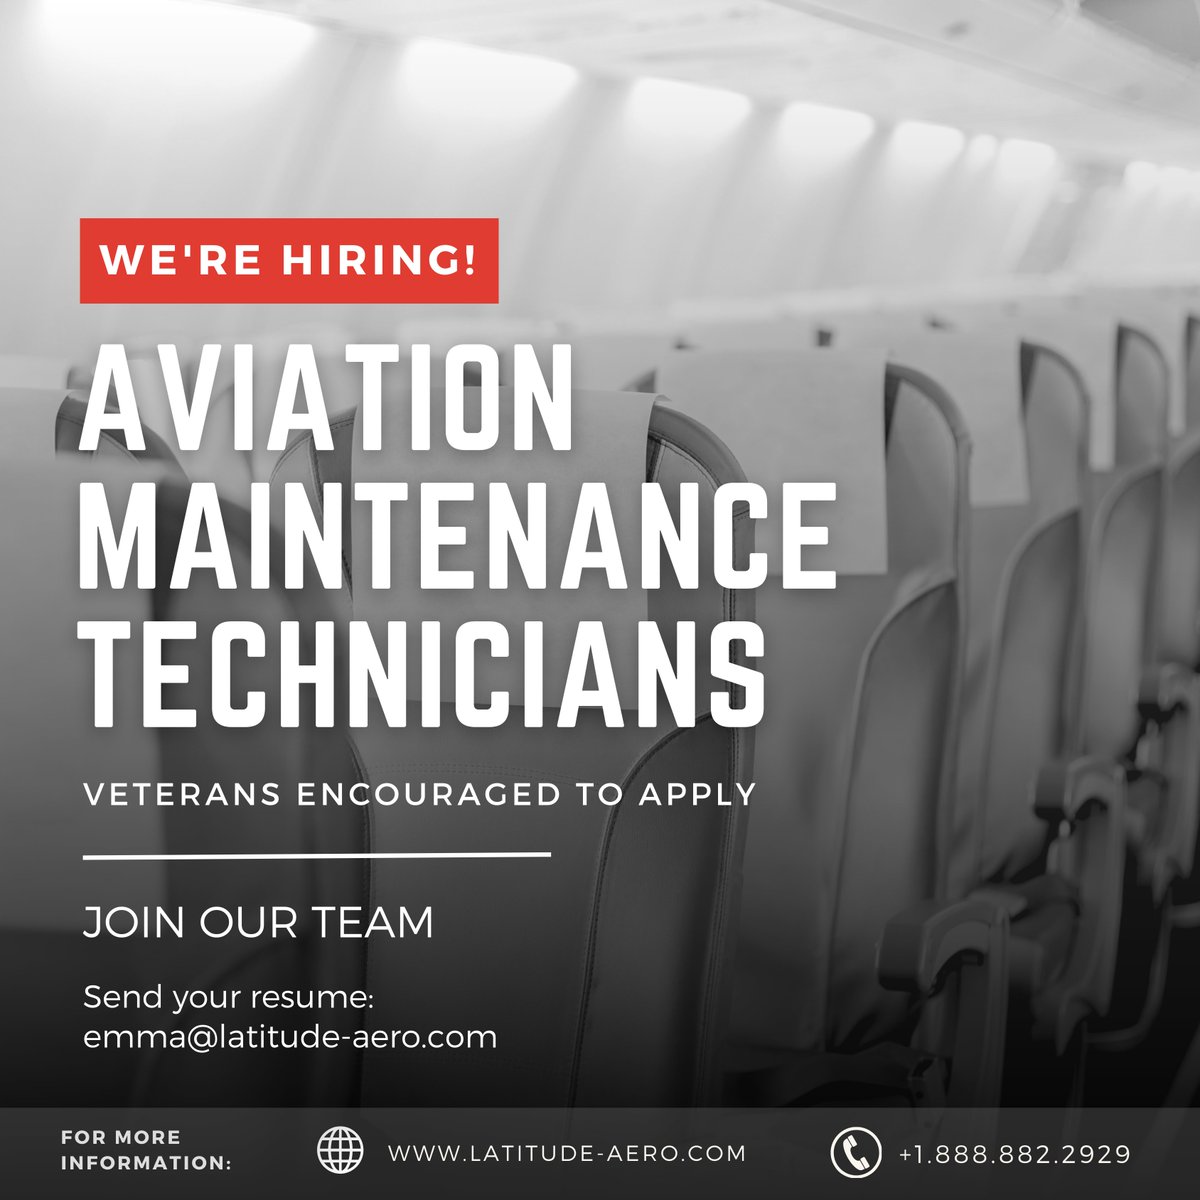 ✈️ Ready for a career move? We're keeping our doors wide open for talented individuals like you! Latitude Aero is currently hiring Aviation Maintenance Technicians with a minimum of one year of relevant experience. Veterans are encouraged to apply. Send your resume to…